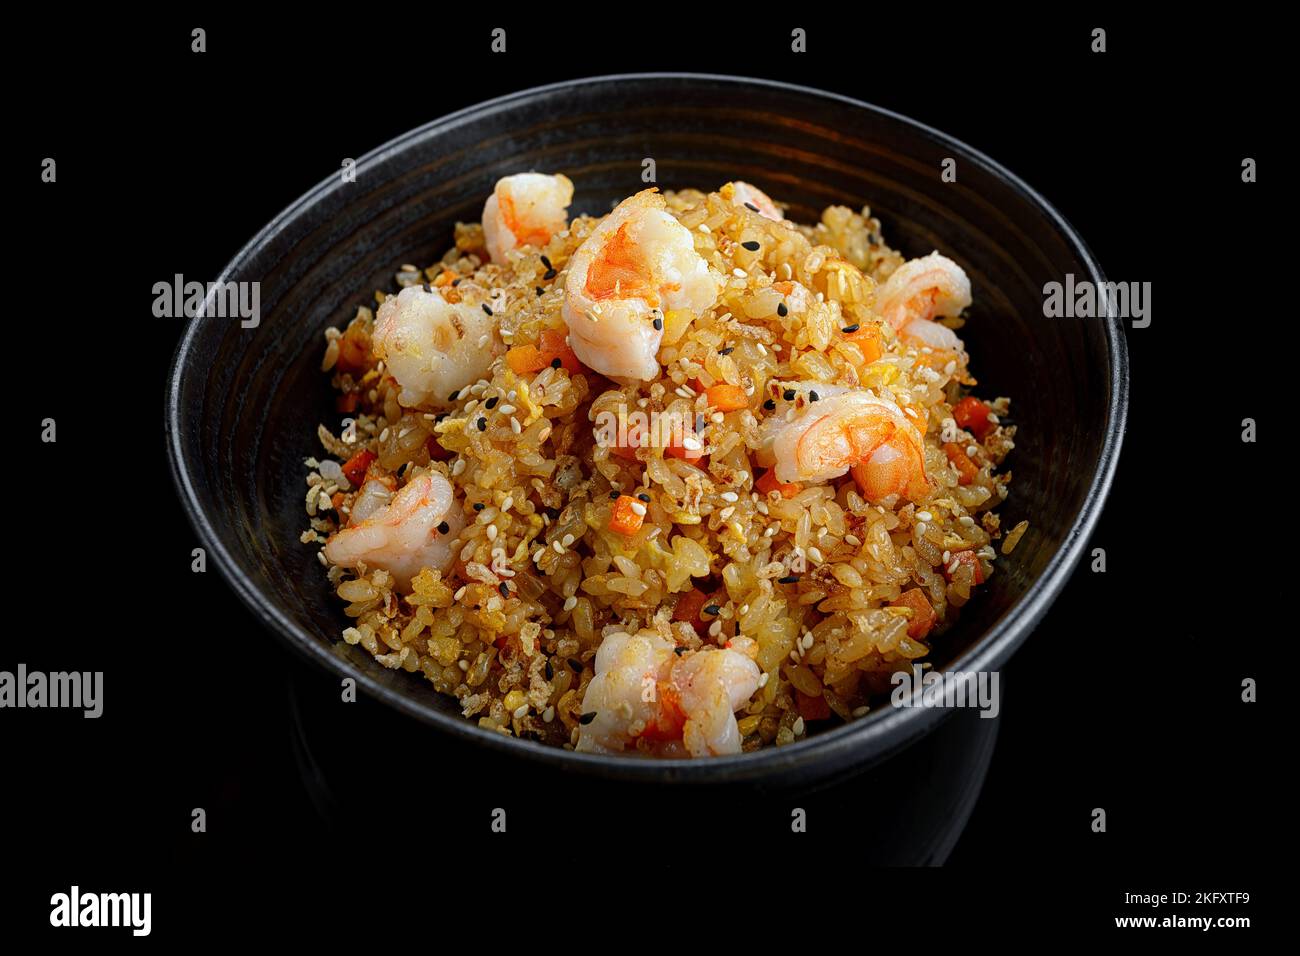 Fried rice with shrimp and sesame, on a dark background. Panasia Stock Photo